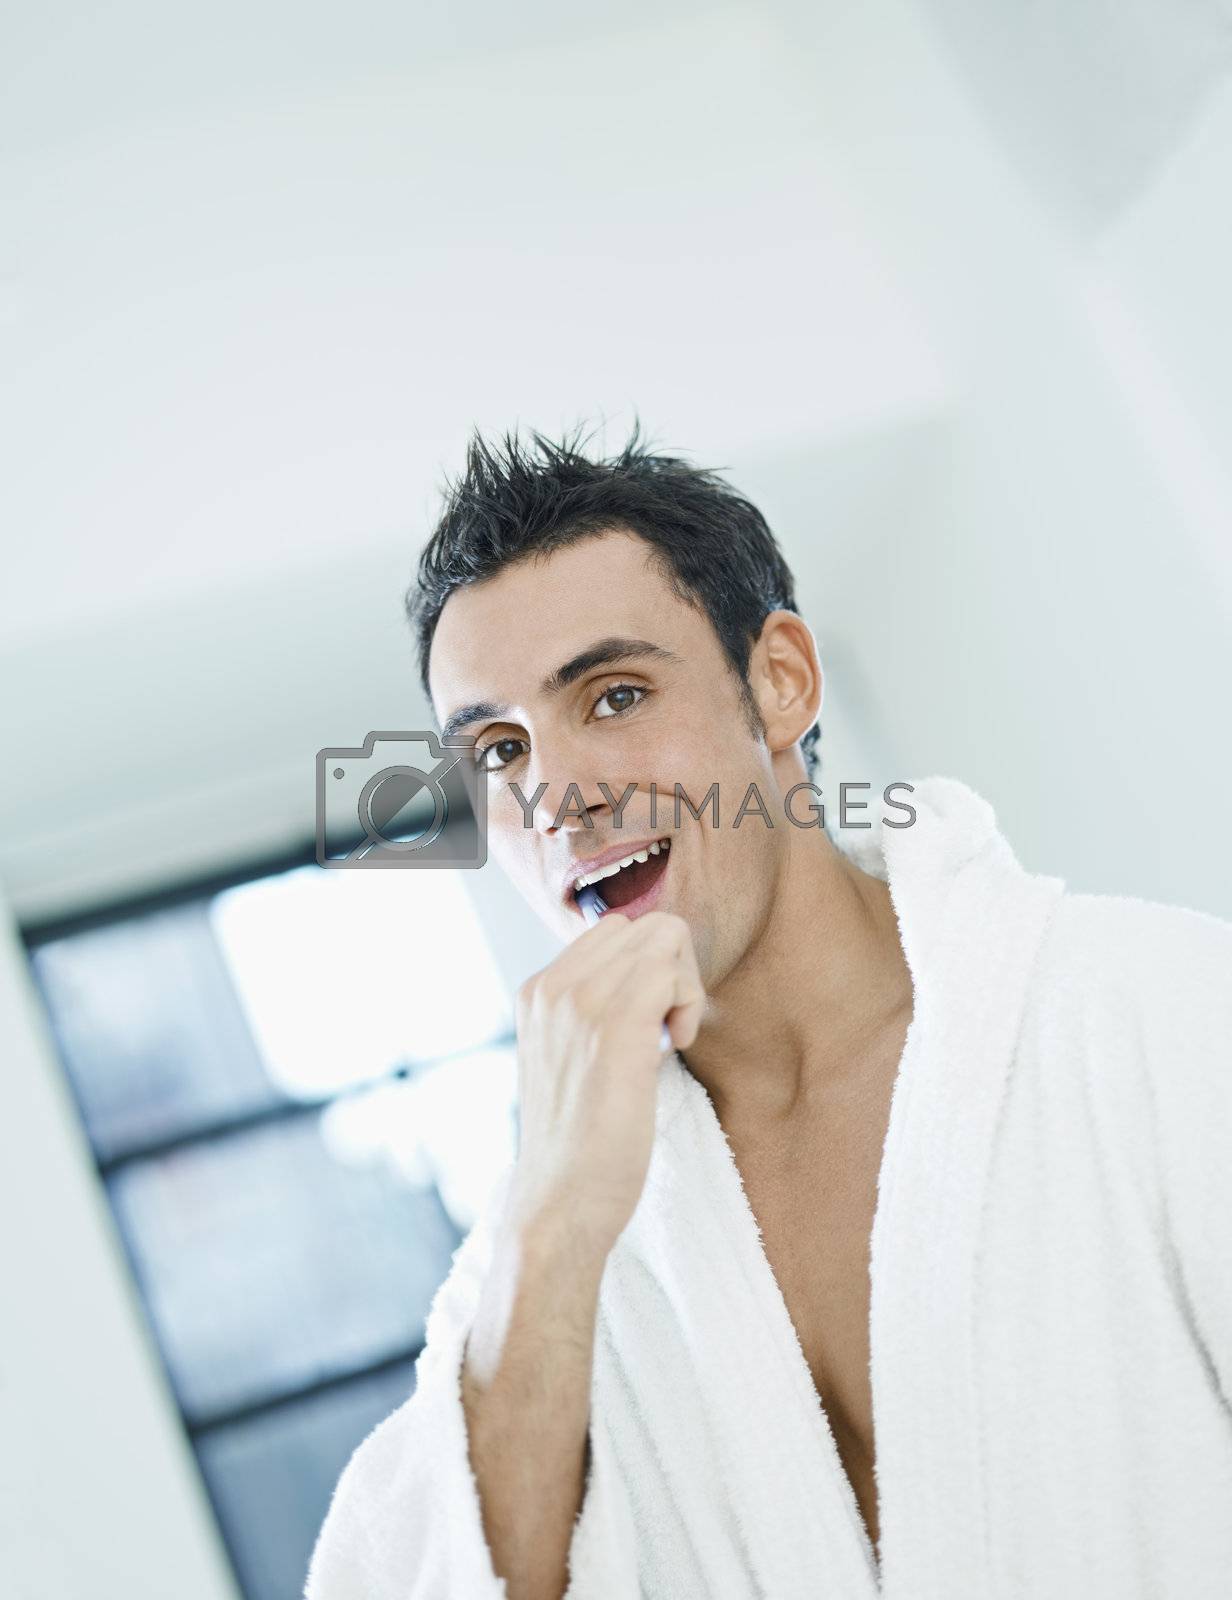 caucasian adult man with bathrobe brushing teeth in bathrooom and looking at camera. Vertical shape, waist up, copy space